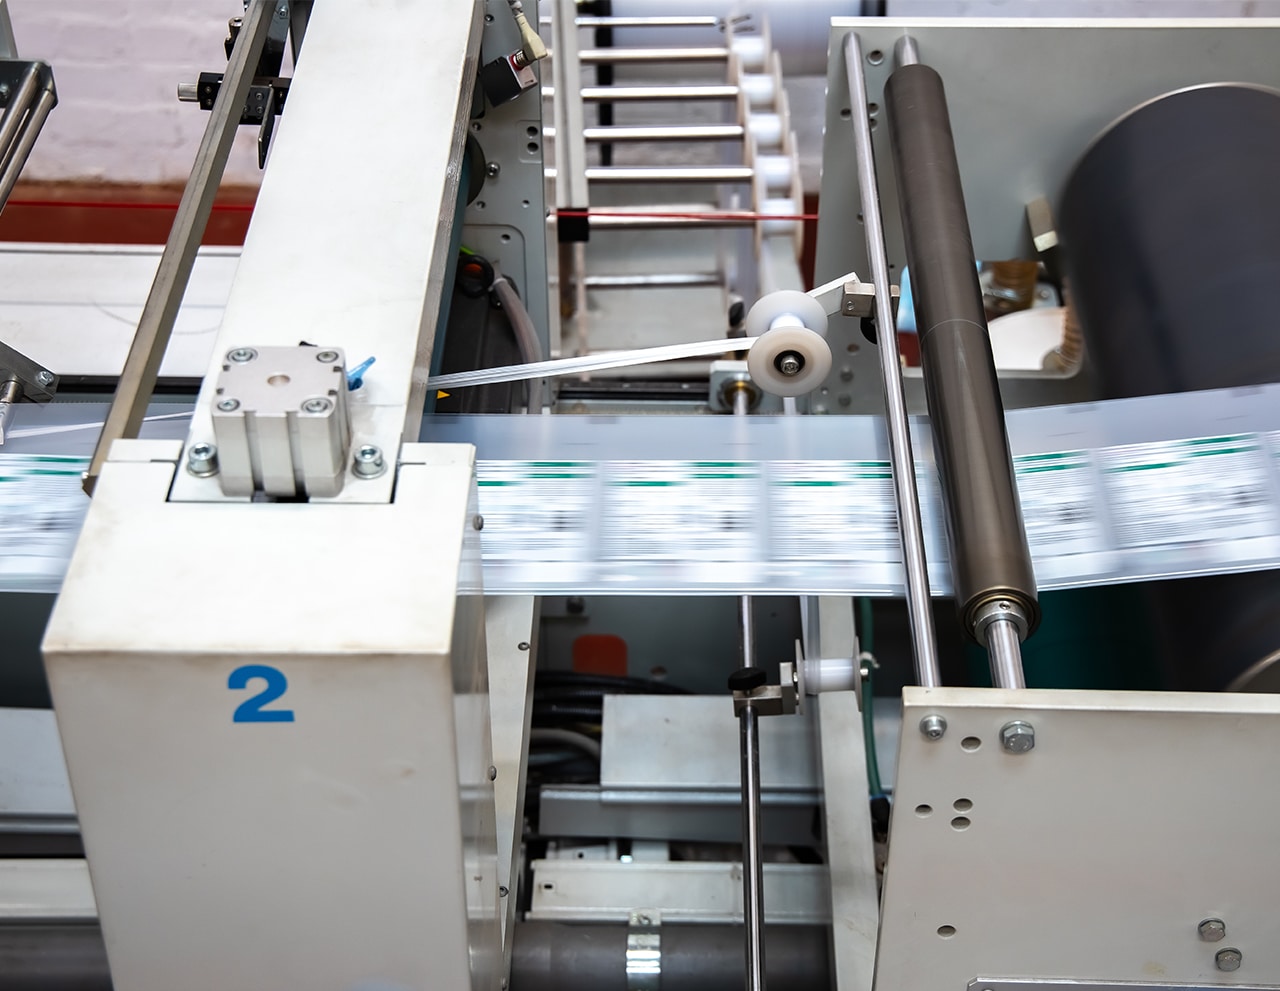 Food packaging being produced